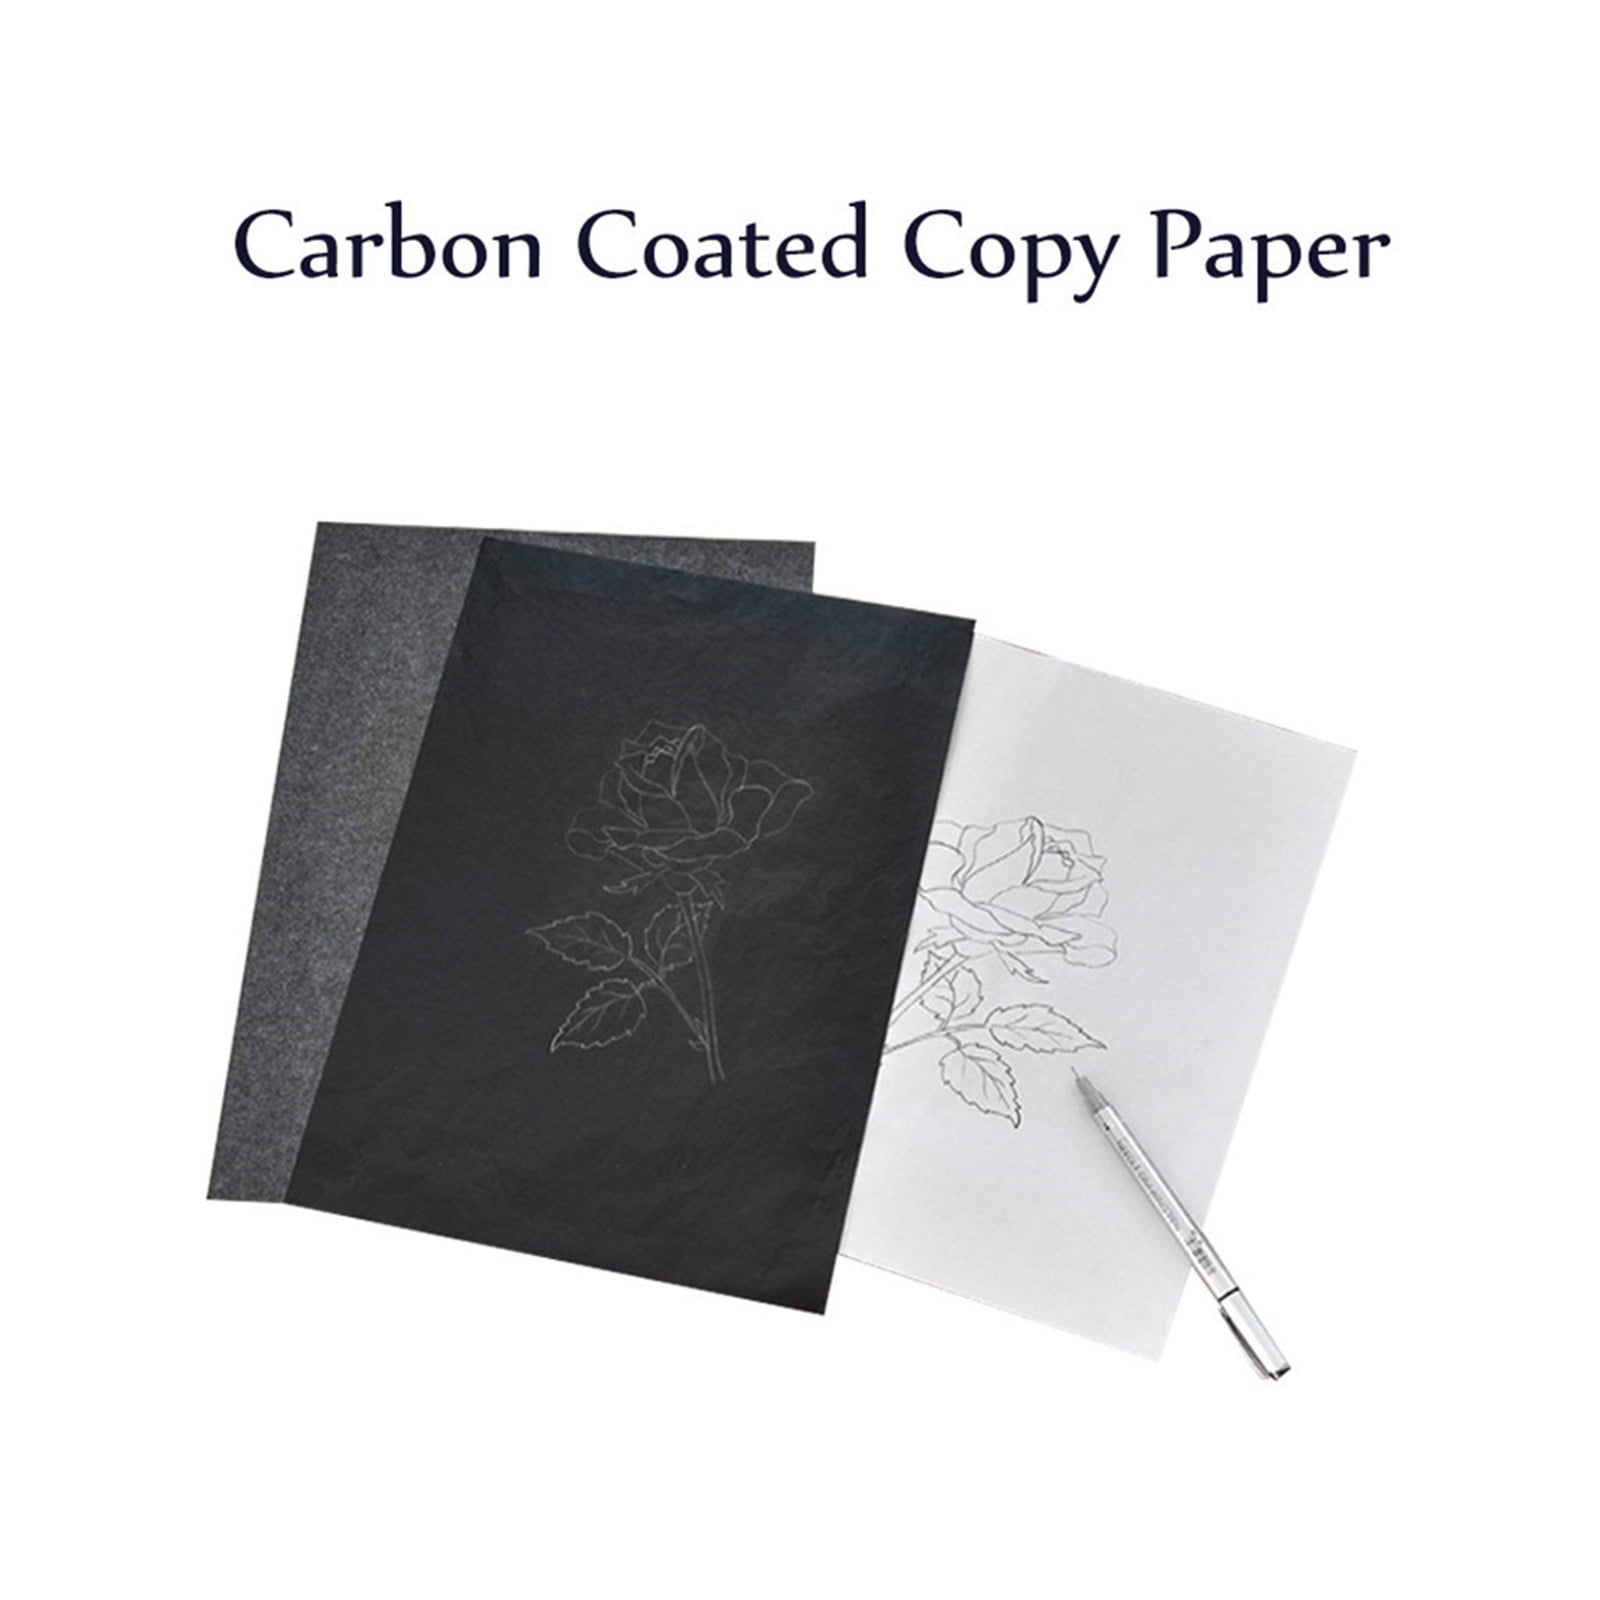 1+ Thousand Carbon Copy Paper Royalty-Free Images, Stock Photos & Pictures